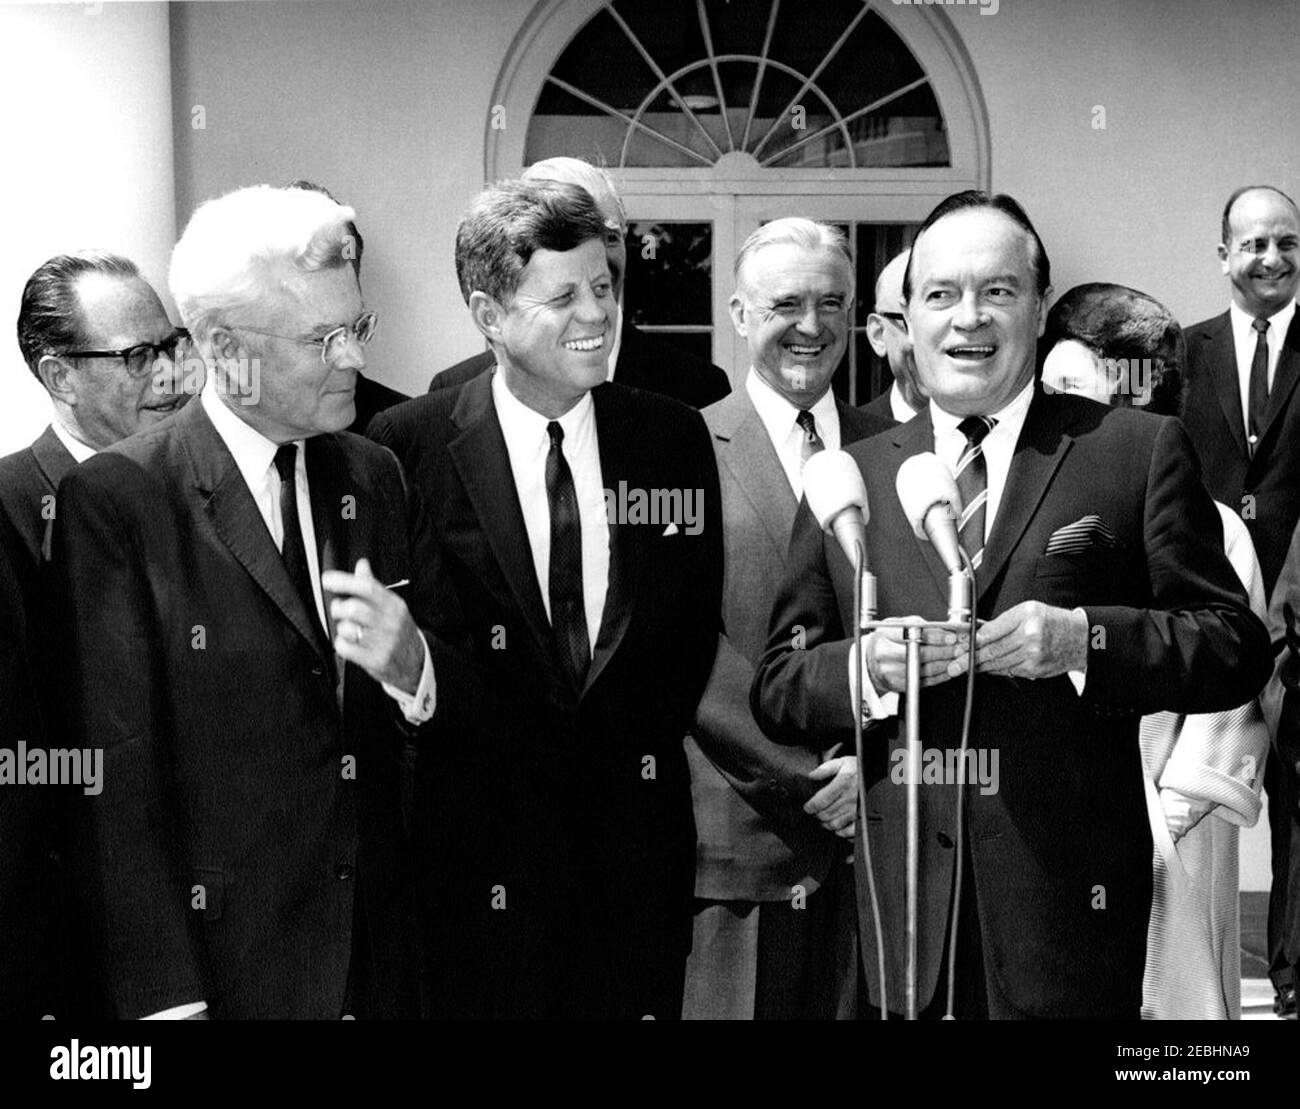 Presentation of a Congressional Gold Medal to Bob Hope, 12:10PM. President John F. Kennedy laughs as actor and comedian, Bob Hope, delivers remarks after receiving the Congressional Gold Medal, presented by President Kennedy in recognition of his services to the country as an entertainer during World War II. Left to right: Senator Thomas H. Kuchel (California); Representative Michael A. Feighan (Ohio); President Kennedy; Senator Stuart Symington (Missouri); Mr. Hope; Dolores Hope (mostly hidden), wife of Mr. Hope; unidentified man. Rose Garden, White House, Washington, D.C. Stock Photo